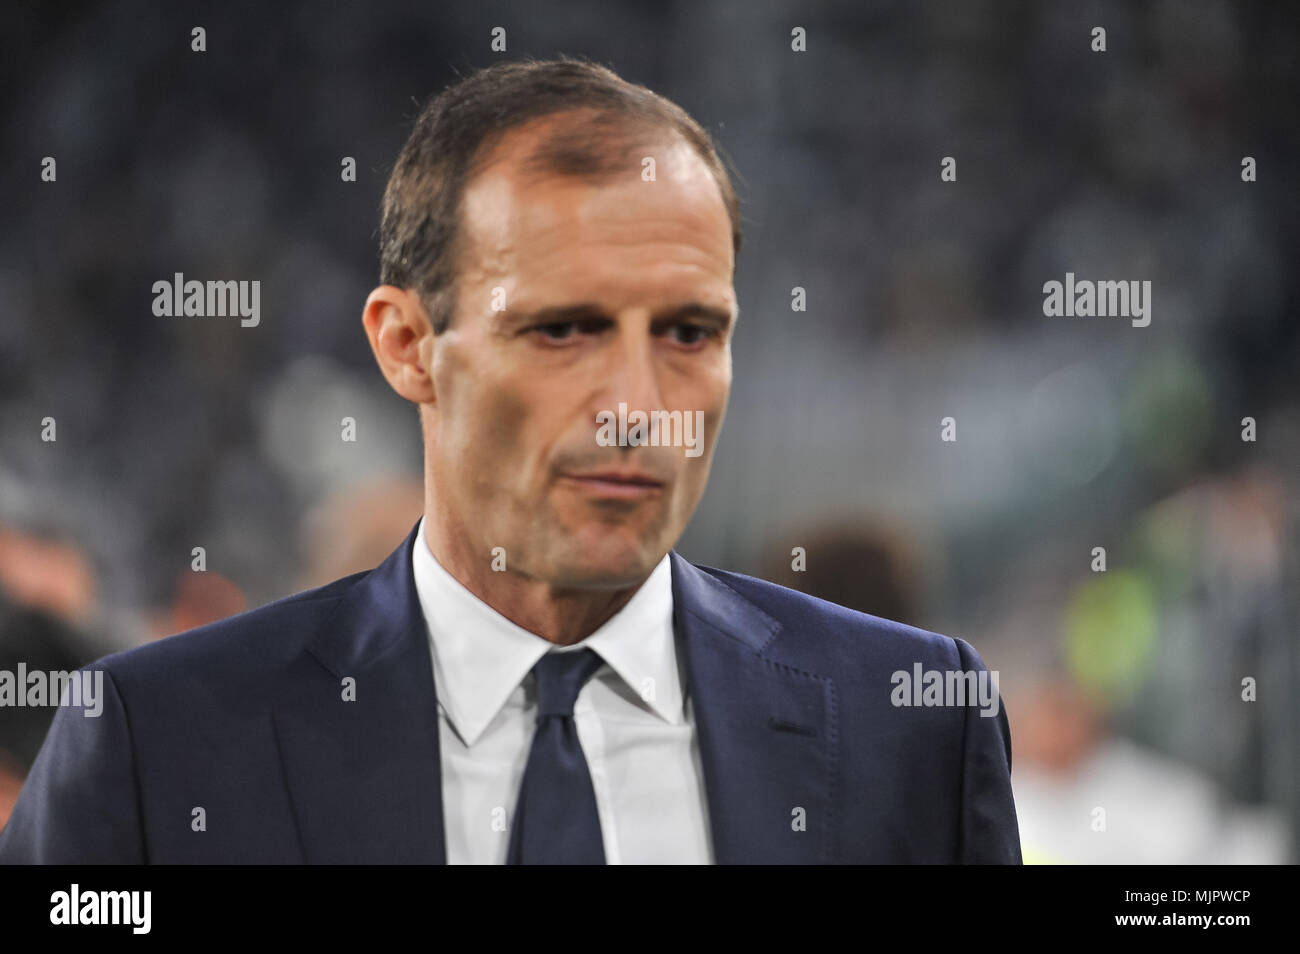 Juventus Coach High Resolution Stock Photography and Images - Alamy